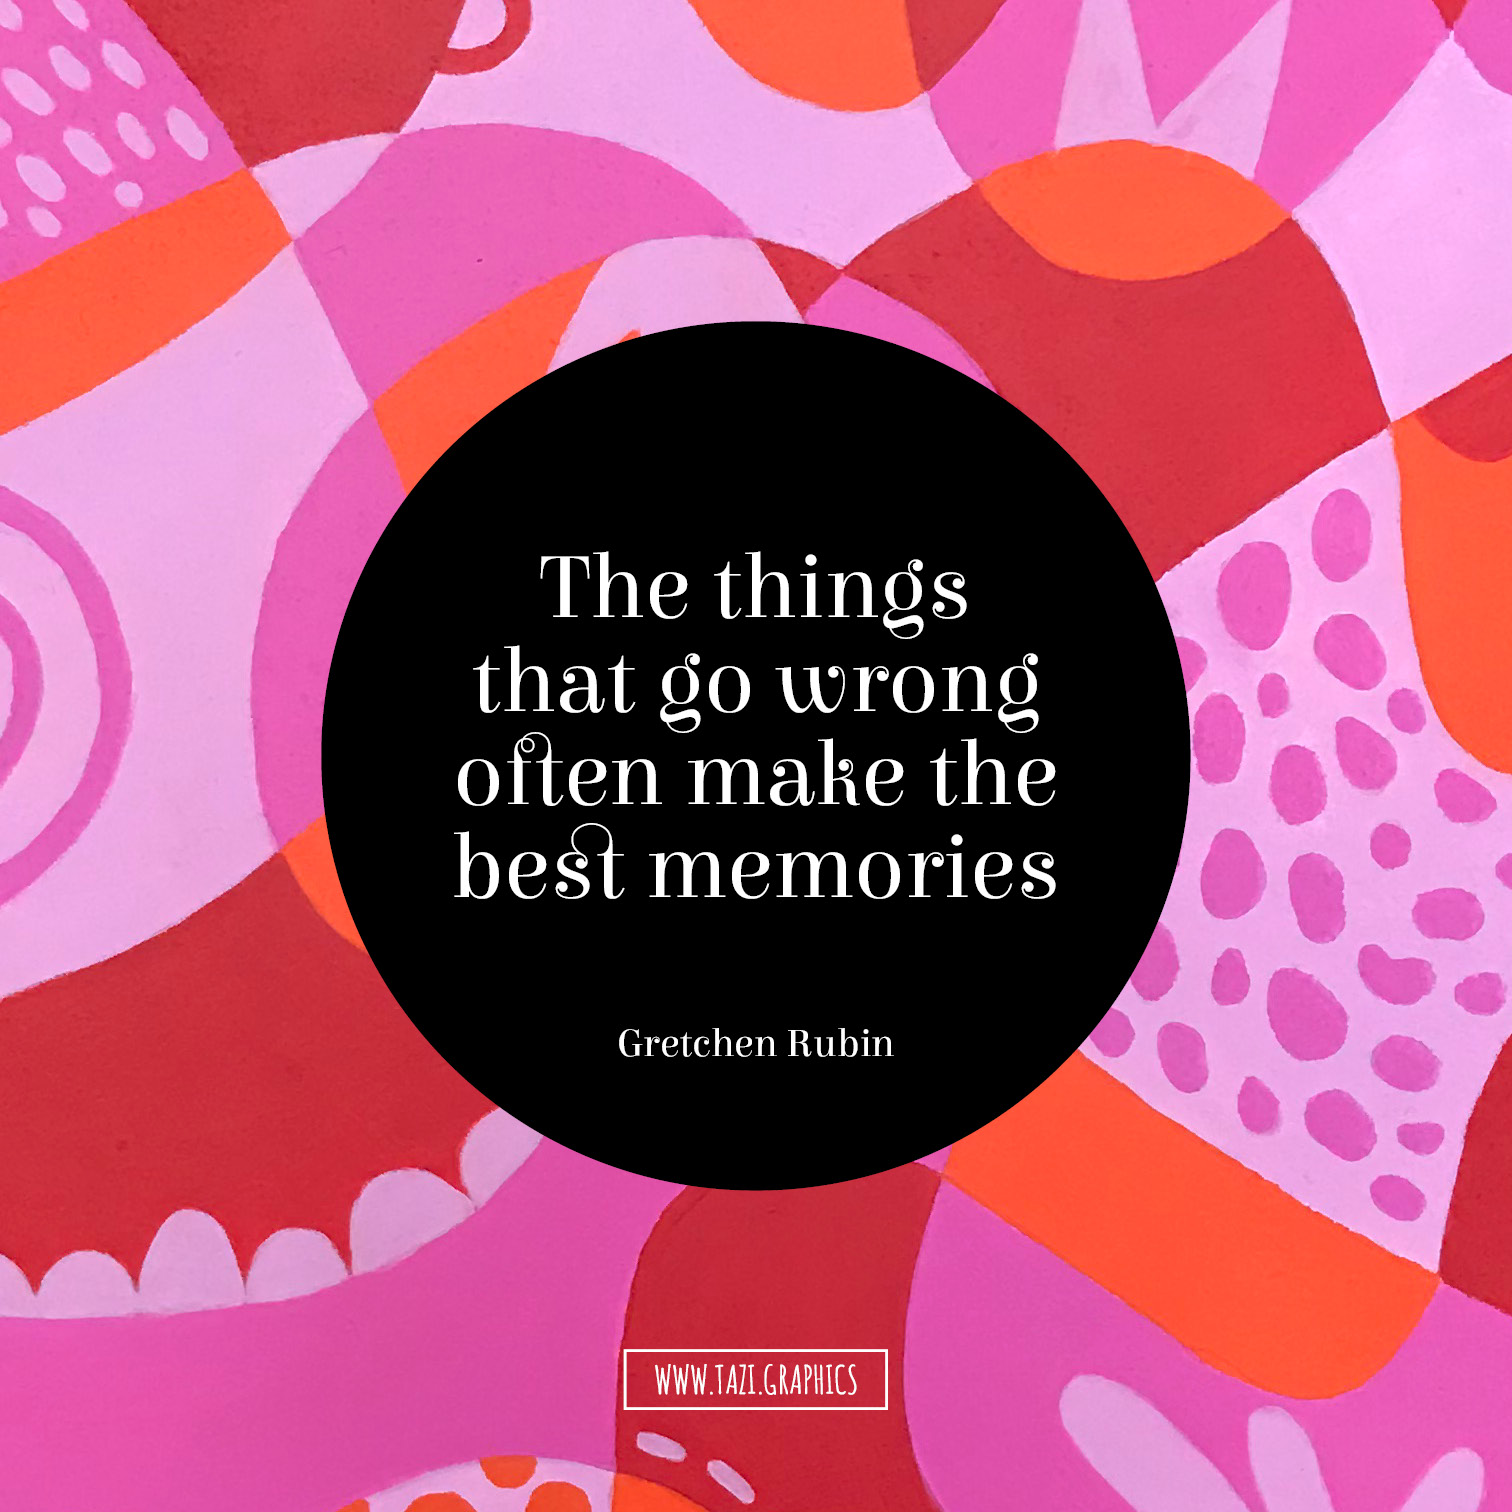 The things that go wrong often make the best memories